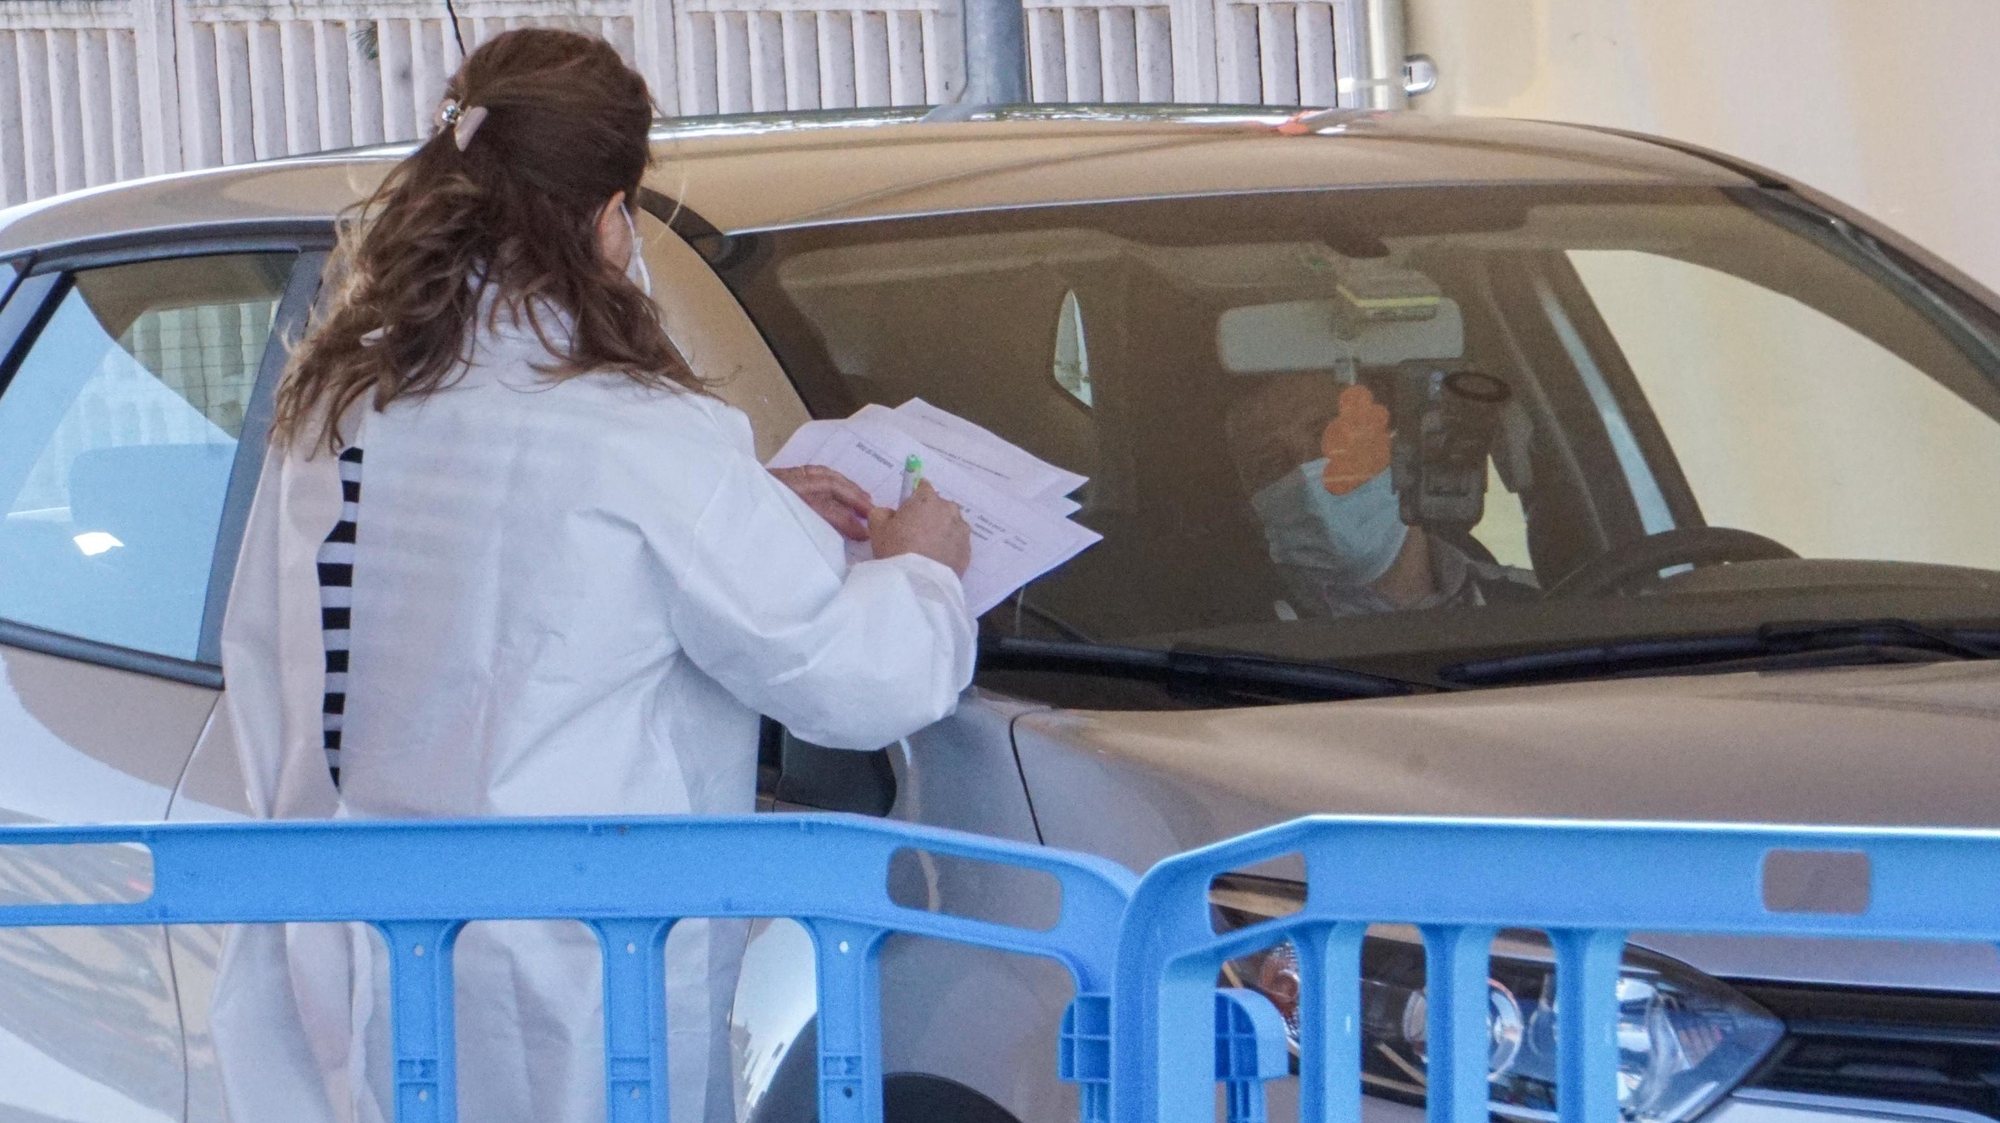 epa09132327 Medical staff await the arrival of cars at the Covid-19 drive-thru vaccination center where medical staff administer Covid-19 coronavirus vaccine injections to patients inside their vehicle in Orbassano, Turin, Italy, 13 April 2021.  EPA/JESSICA PASQUALON